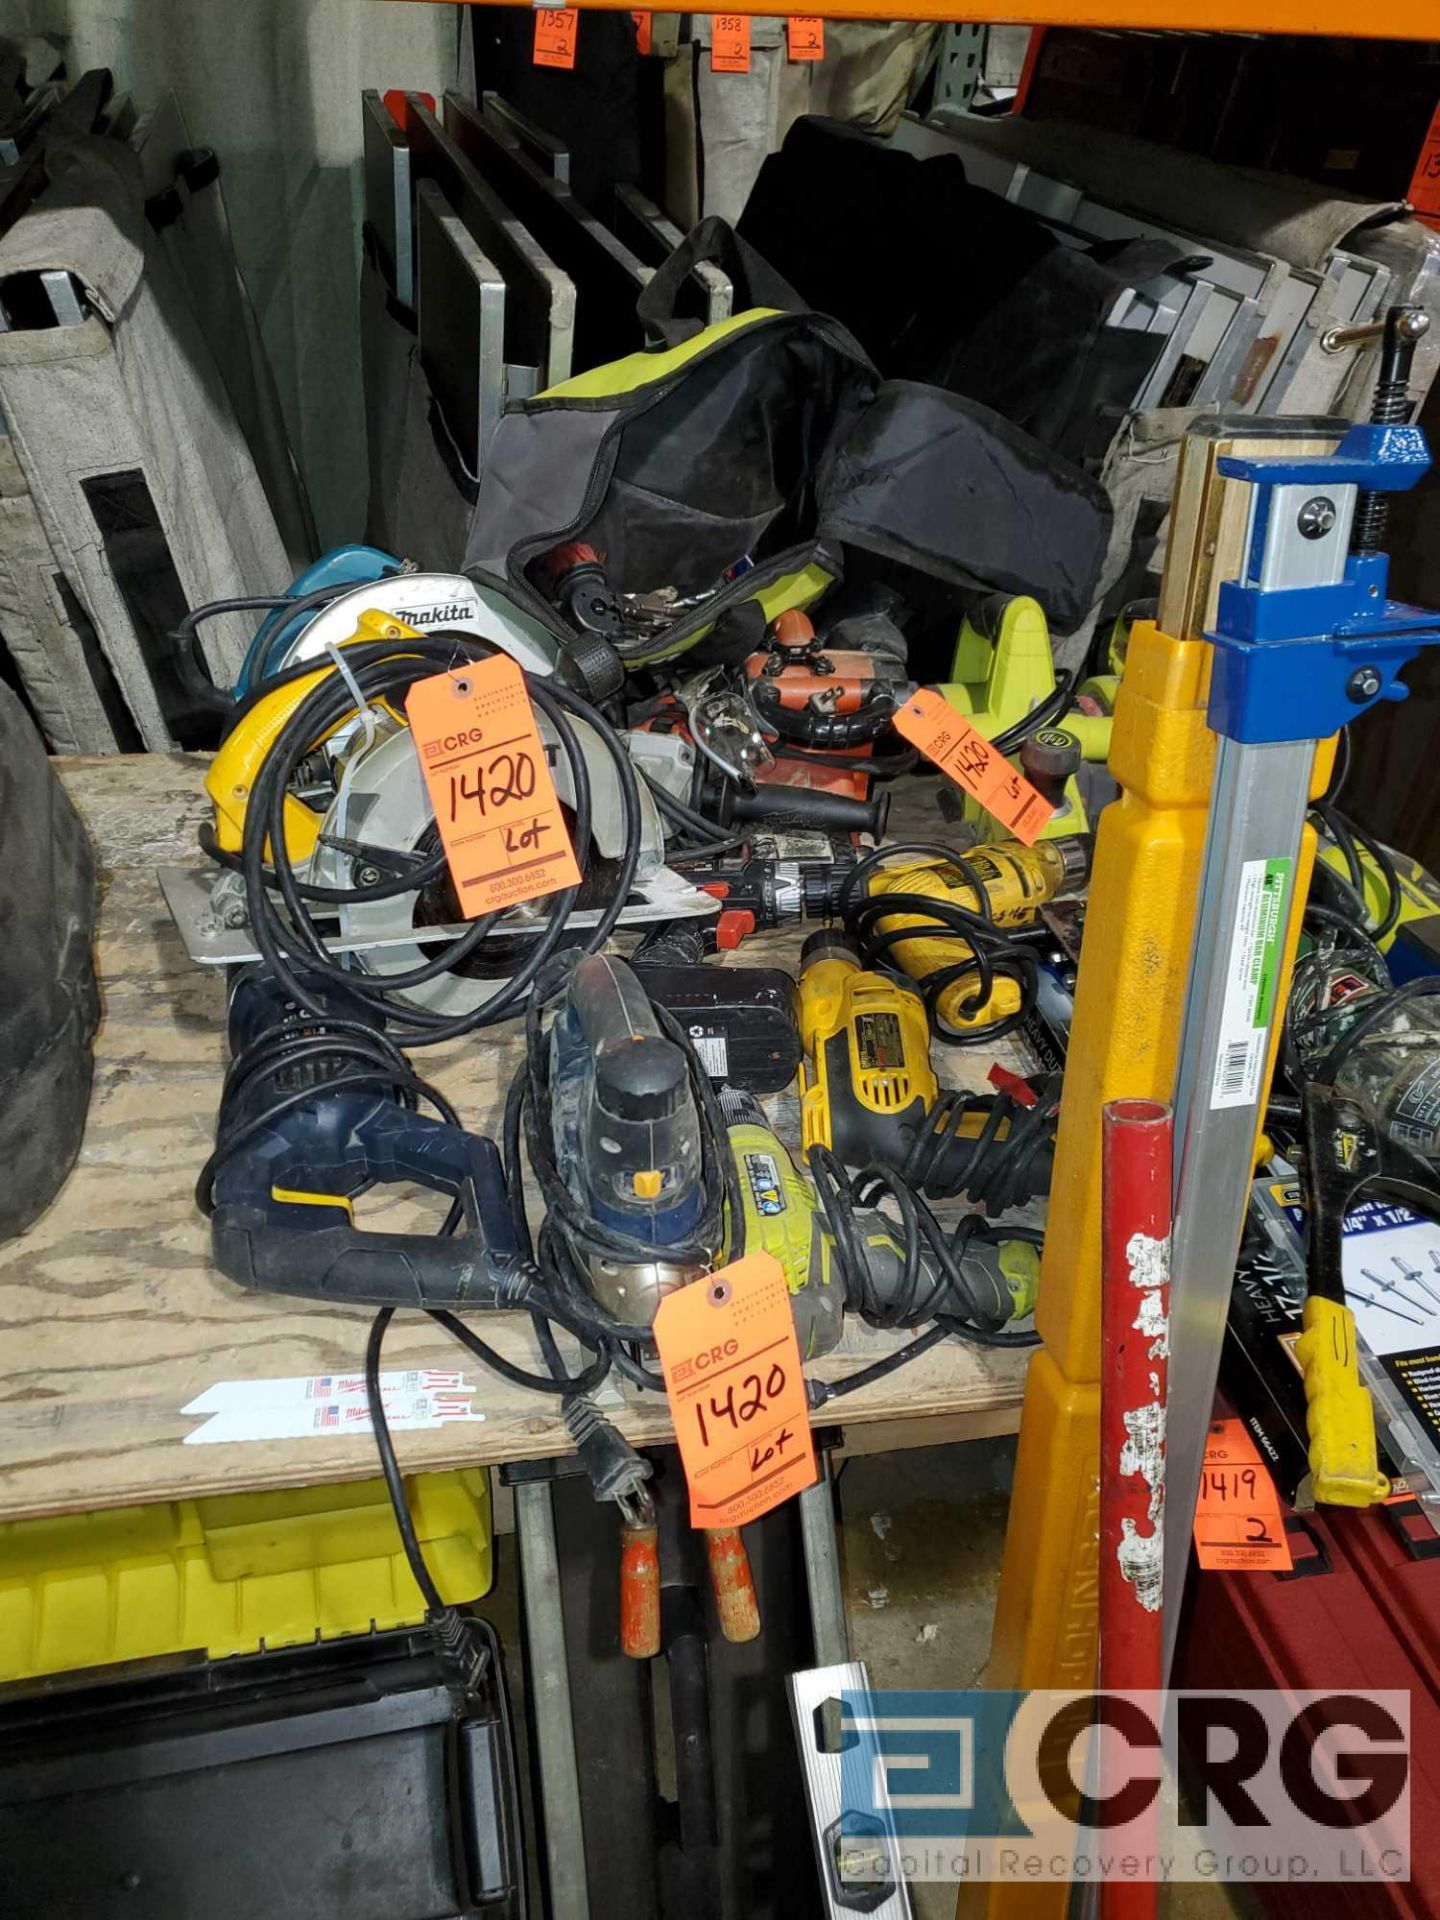 Lot consists of assorted power tools to include, DeWalt 7 1/4 in. circular saw DW364, Makita 7 1/4